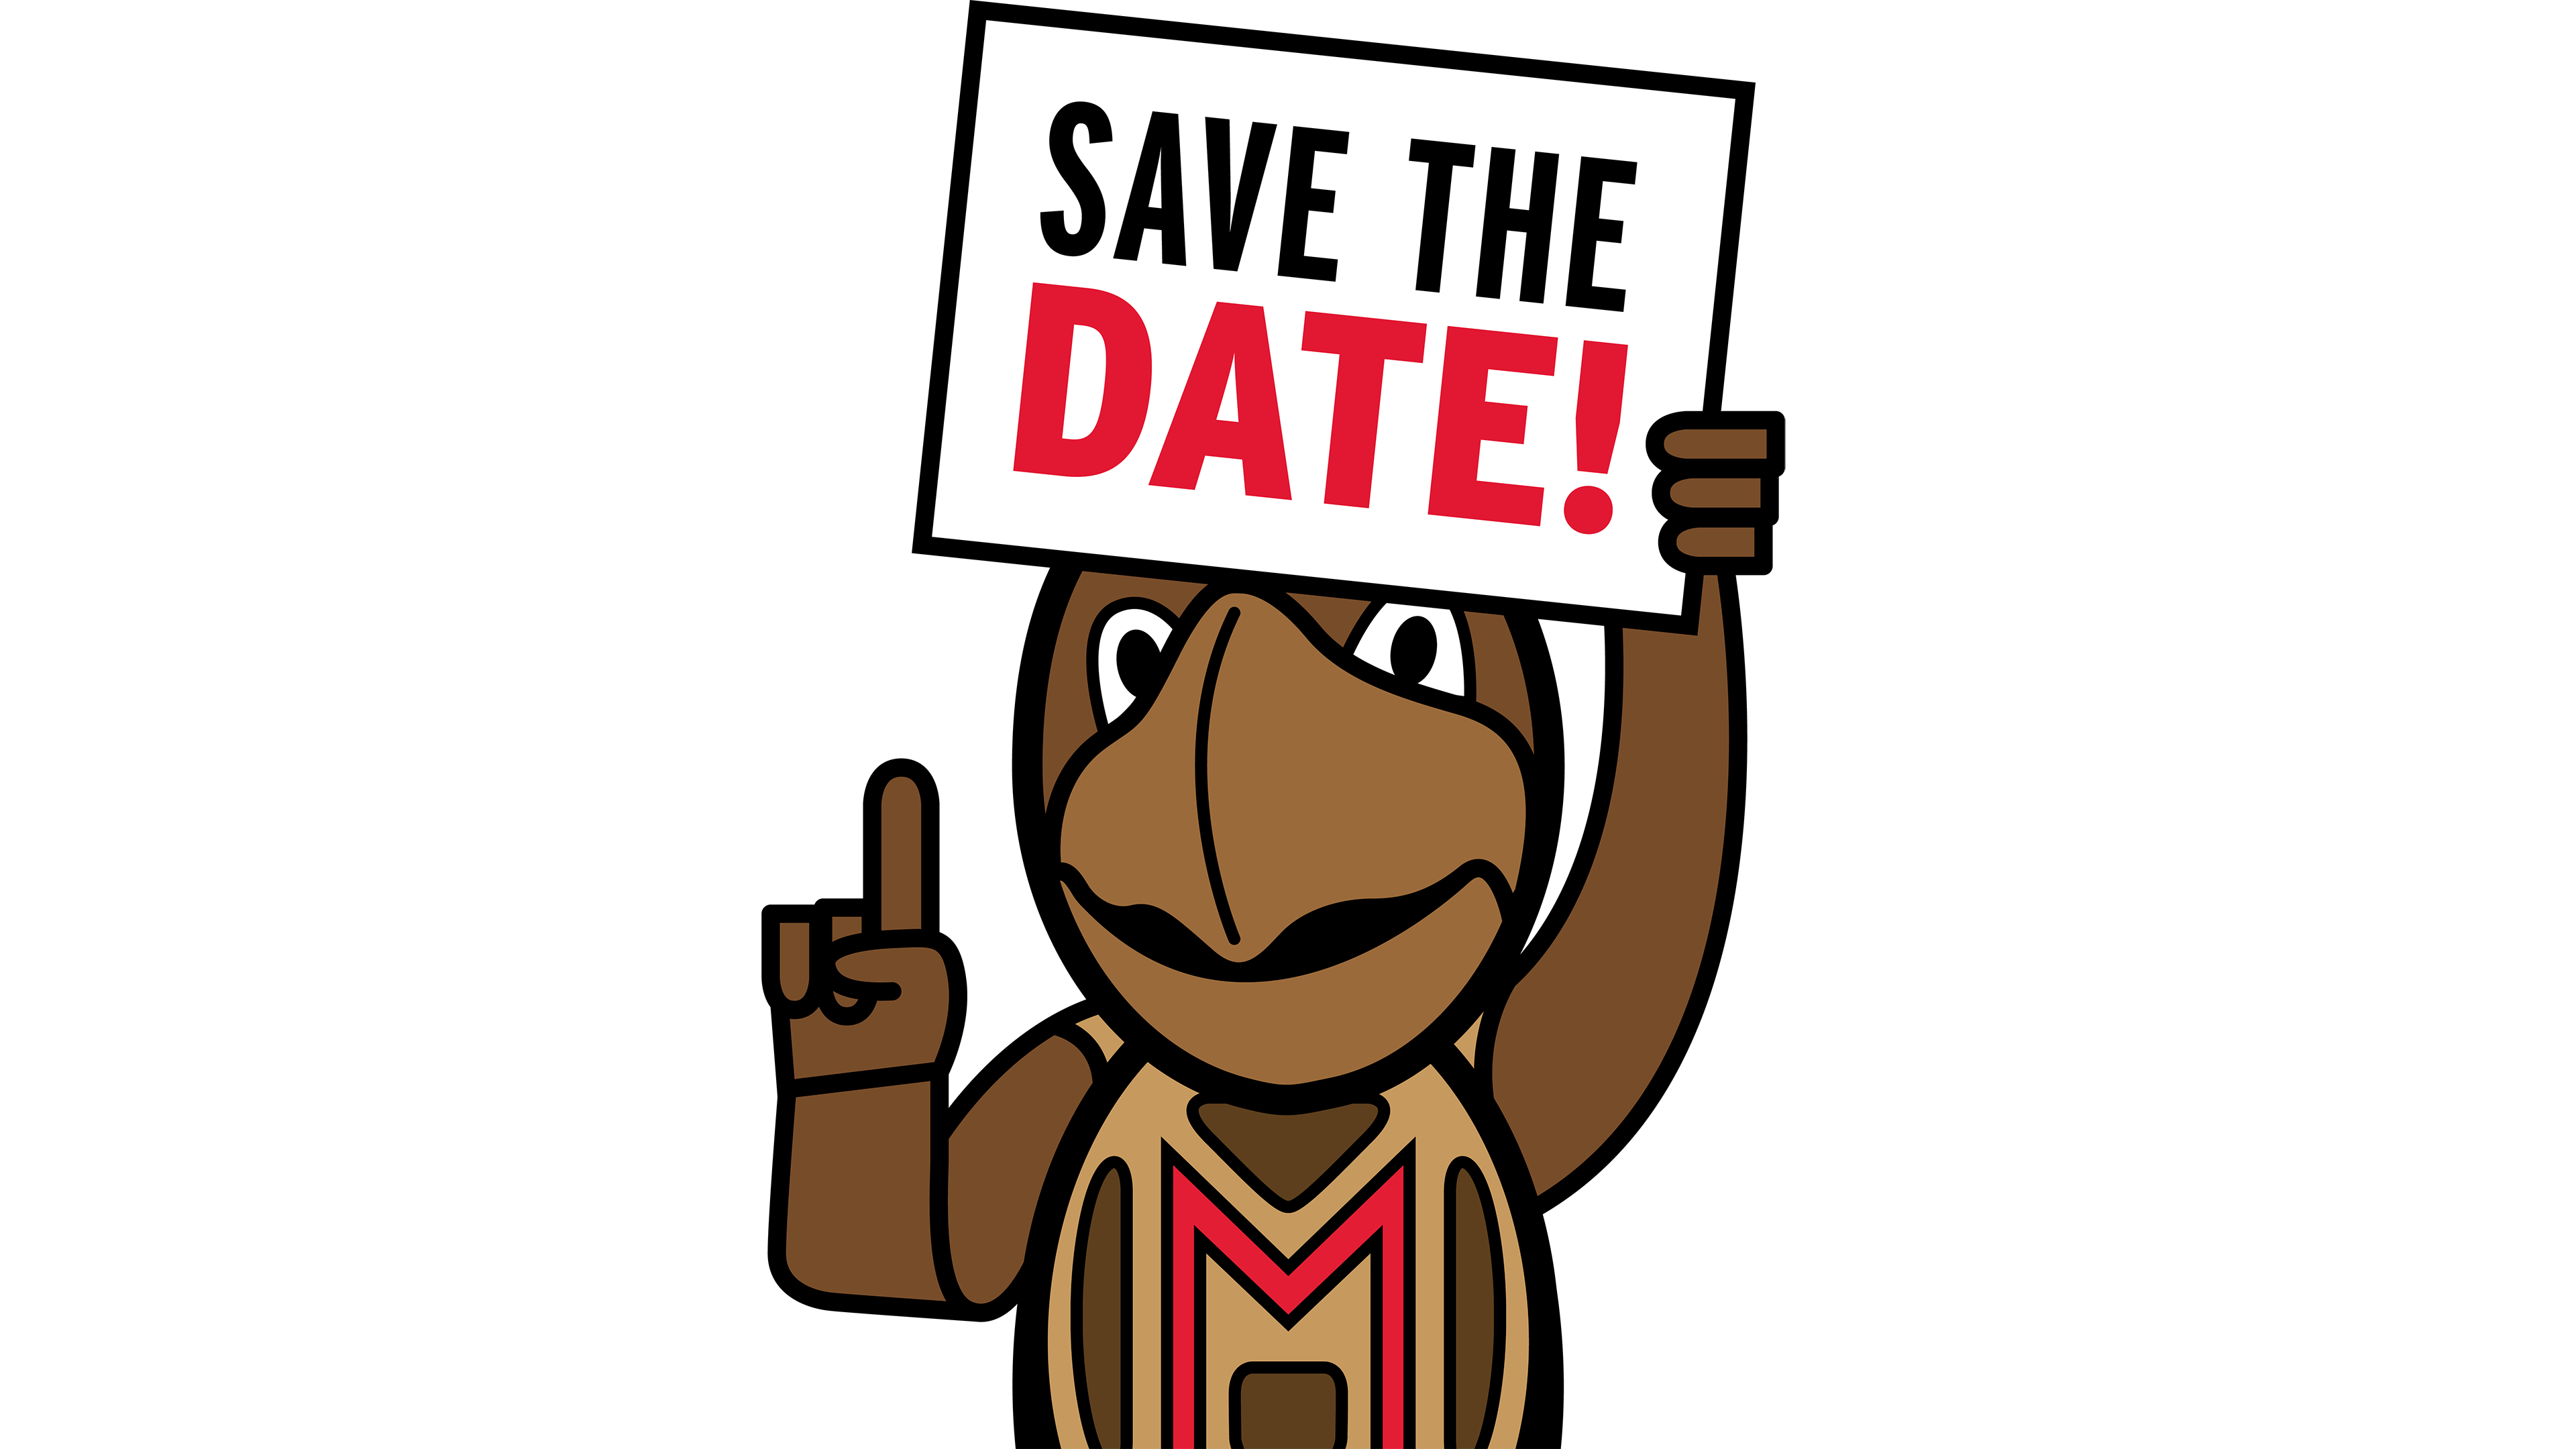 Testudo holding a sign that says "save the date"